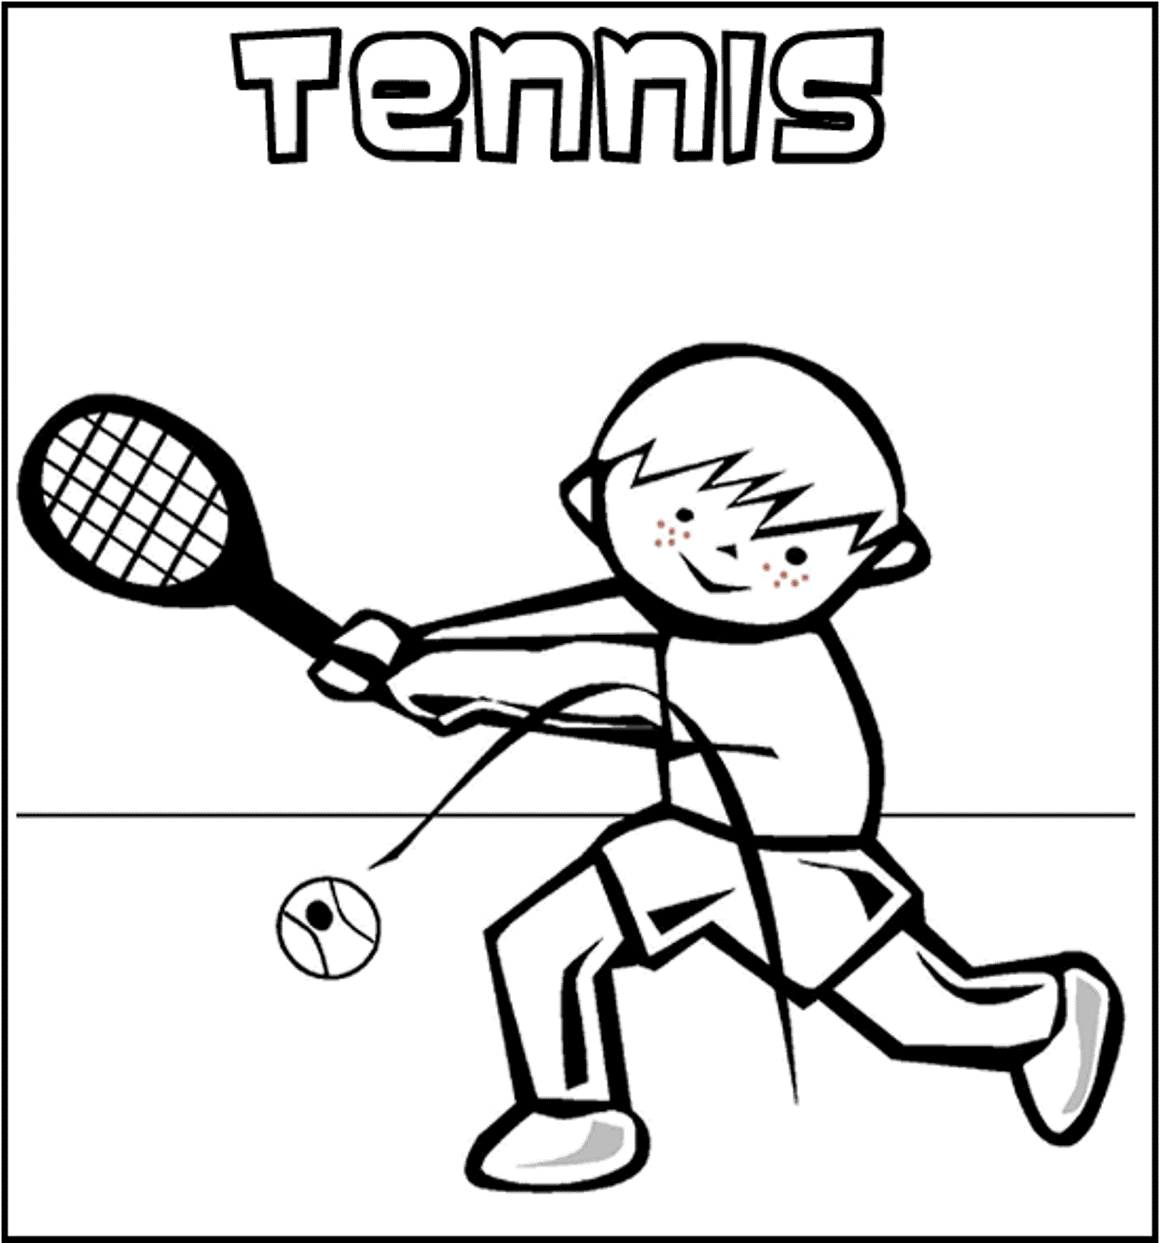 Playing Tennis S3682 Coloring Page